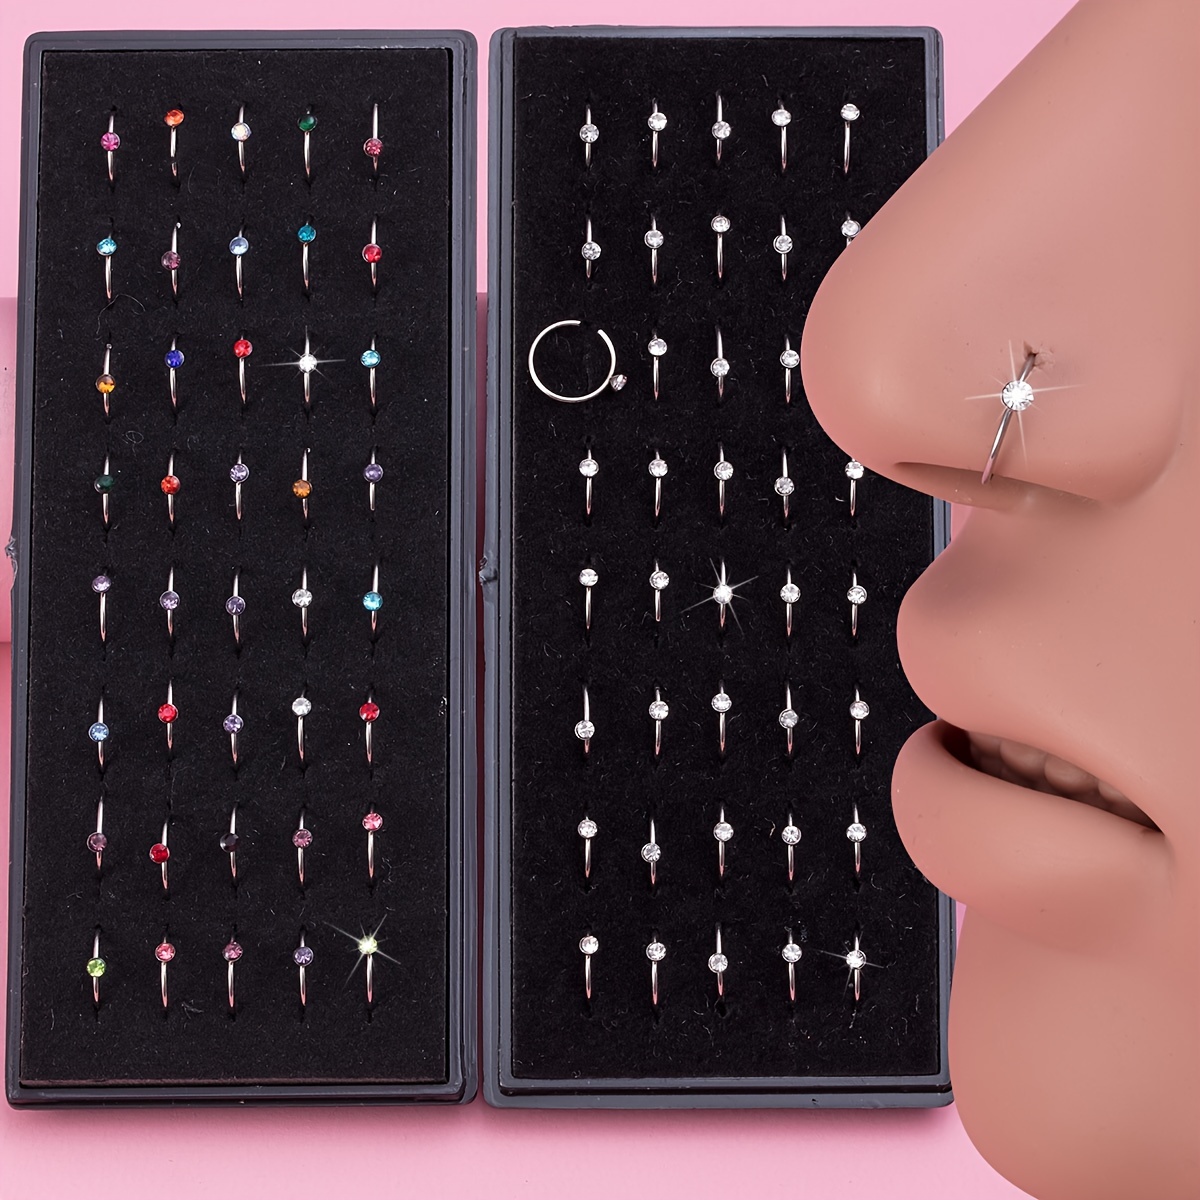 

40pcs/box Zircon Decor Artificial Crystal Nose Rings Stainless Steel Nostril Piercing Jewelry Nose Hoop Ring 8mm Cartilage Tragus Daith Earring Jewelry